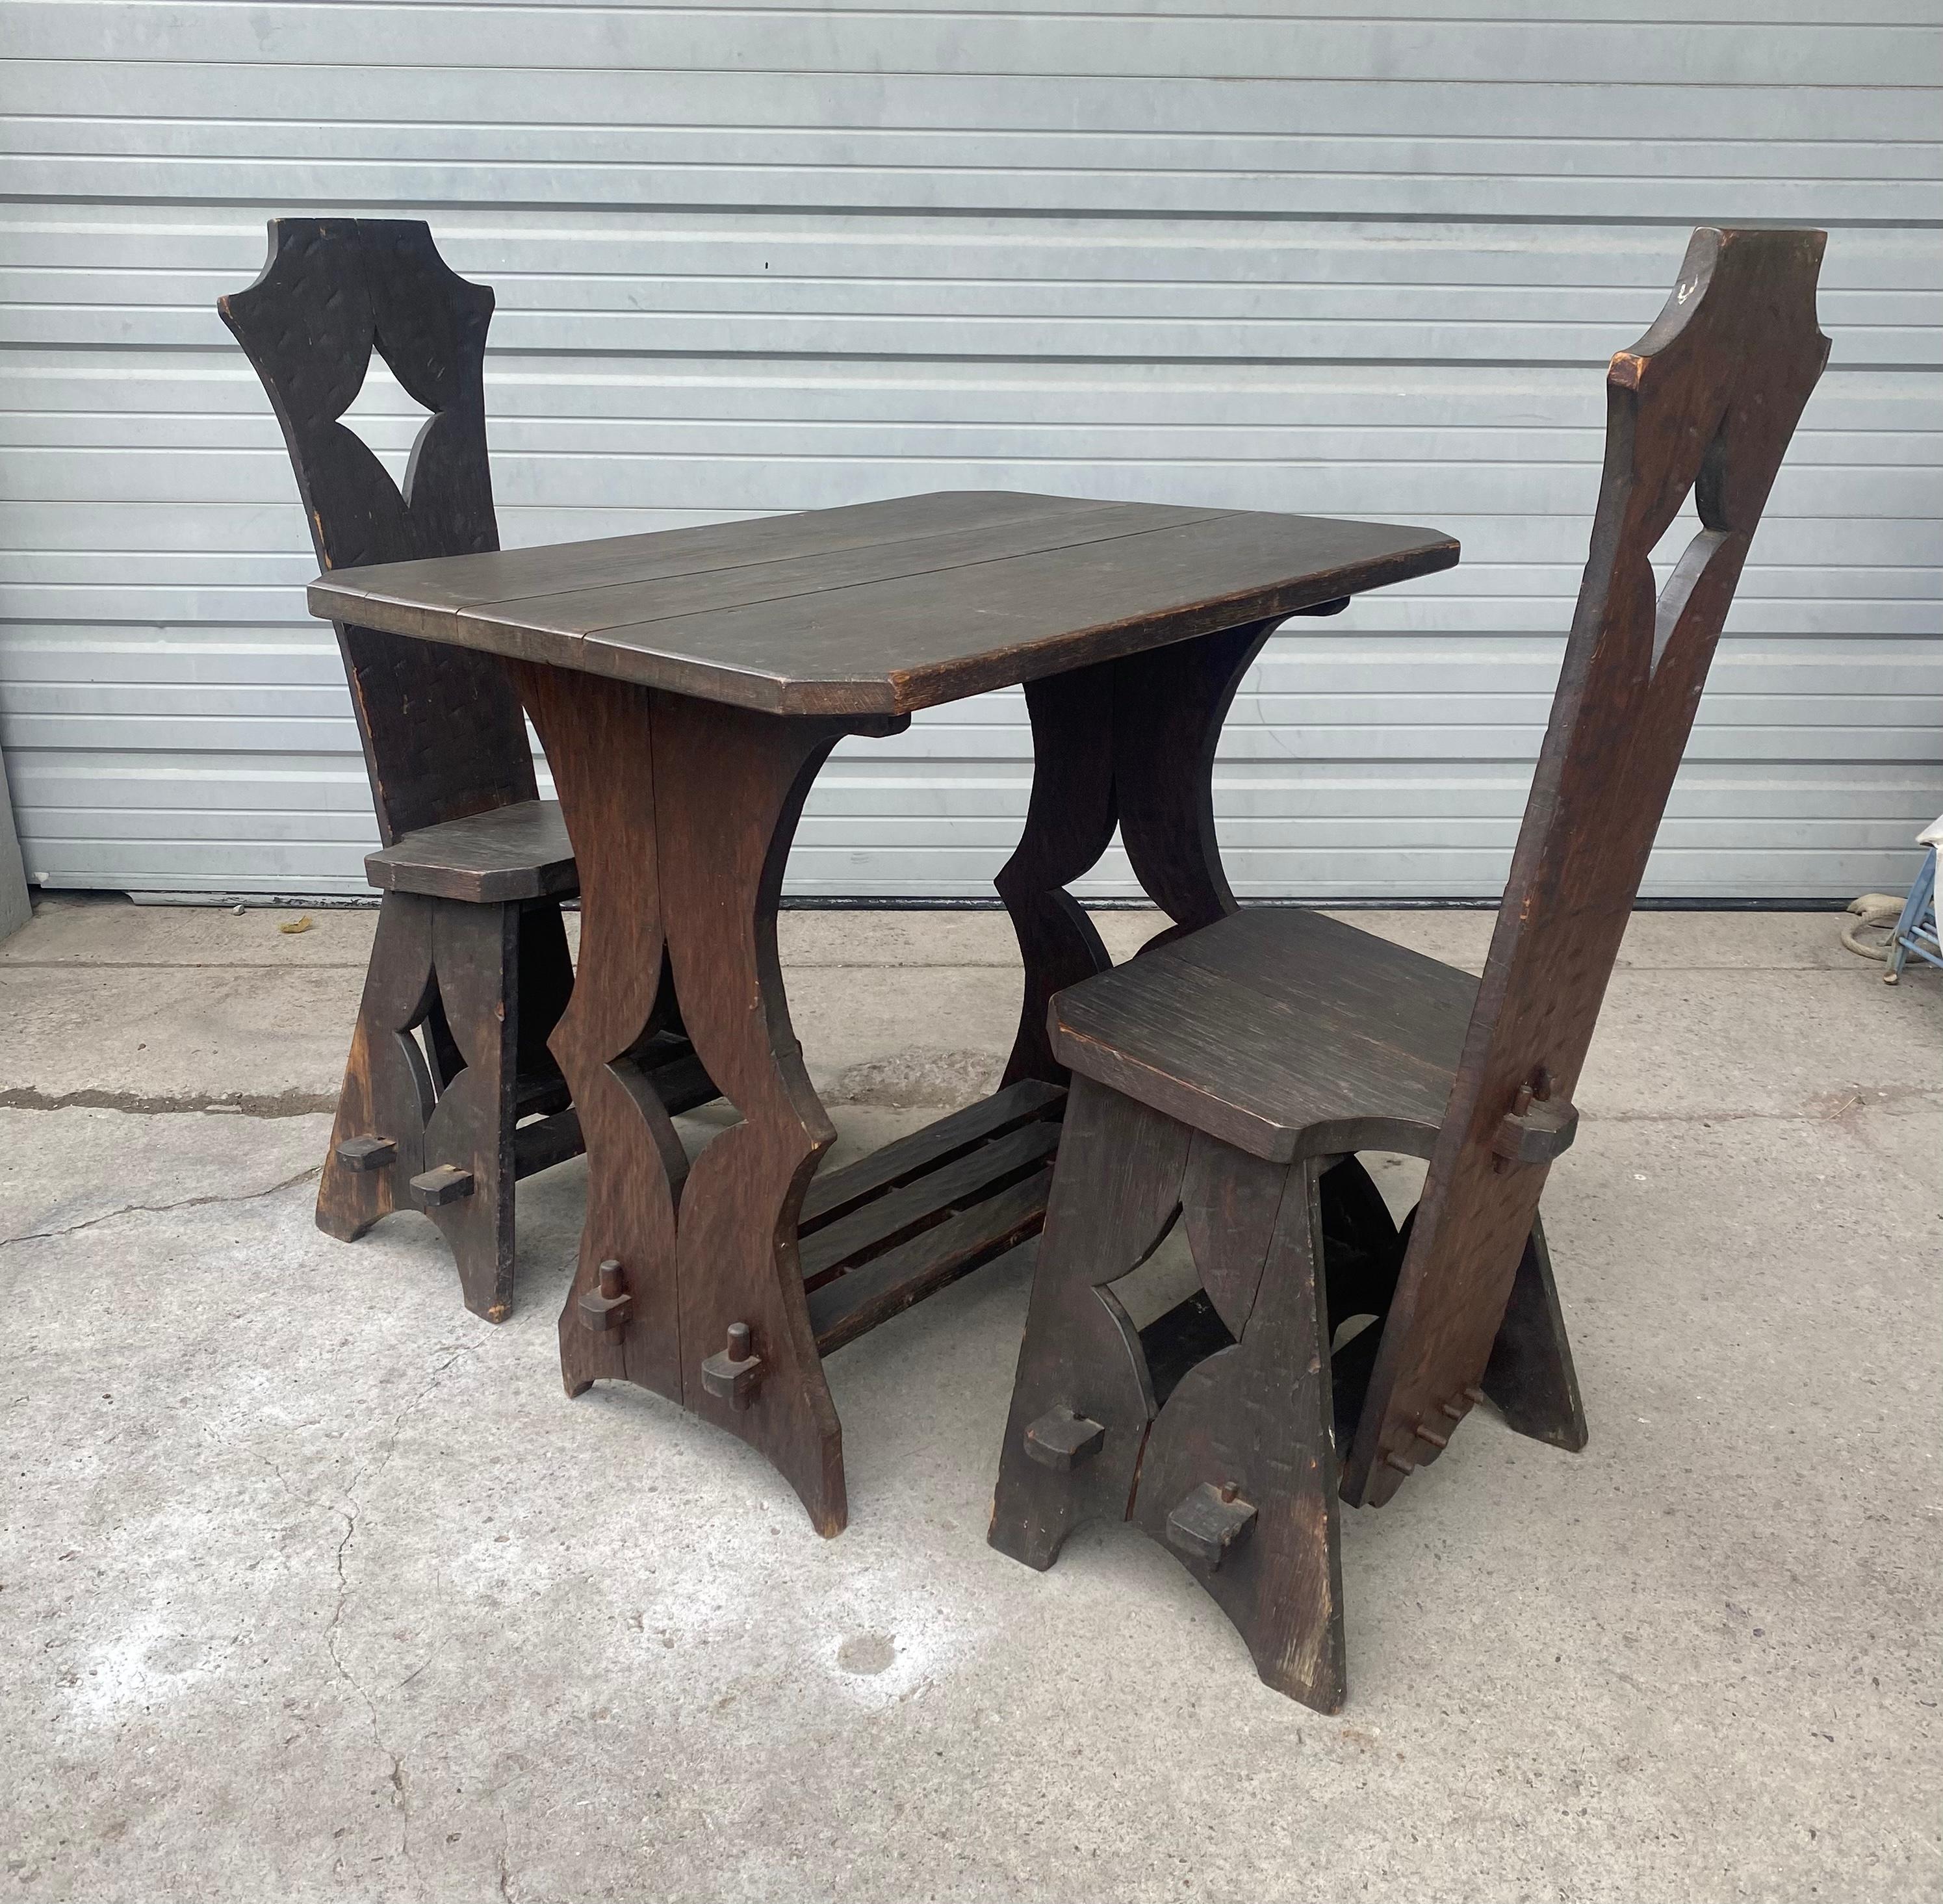 Unusual  Arts and Crafts Pub / Bistro Table and Chairs manner of Limbert..All hand pegged,,dowelled.. Charming set.. Perfect for small little nook in the kitchen,, sun-porch,,etc.. Hand delivery avail to New York City OR anywhere en route from